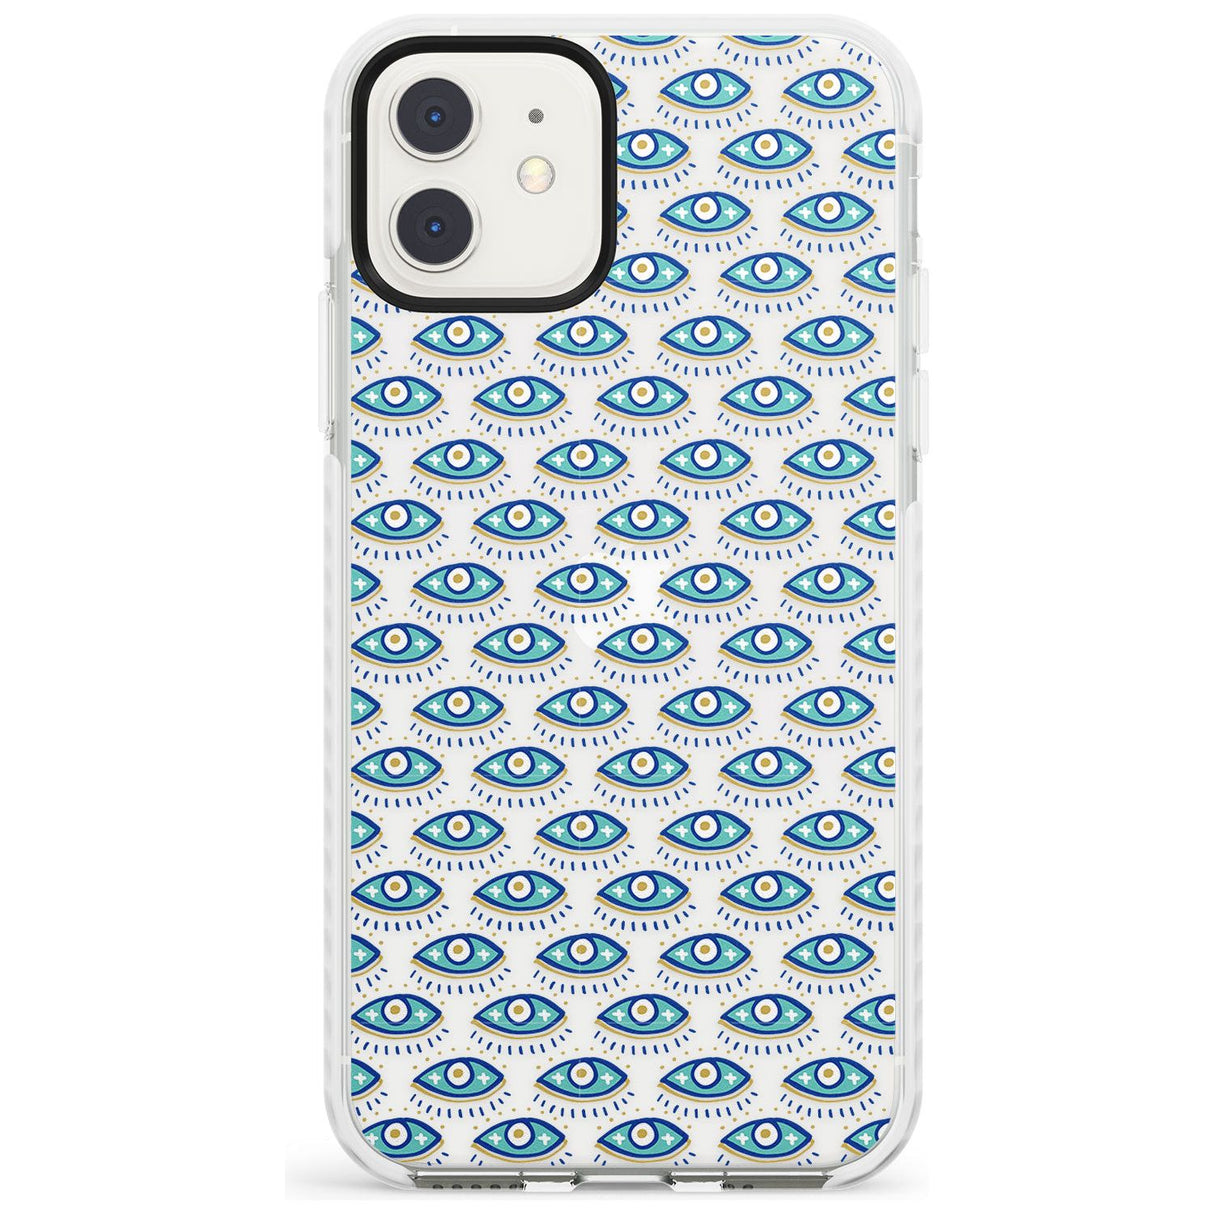 Eyes & Crosses (Clear) Psychedelic Eyes Pattern Impact Phone Case for iPhone 11